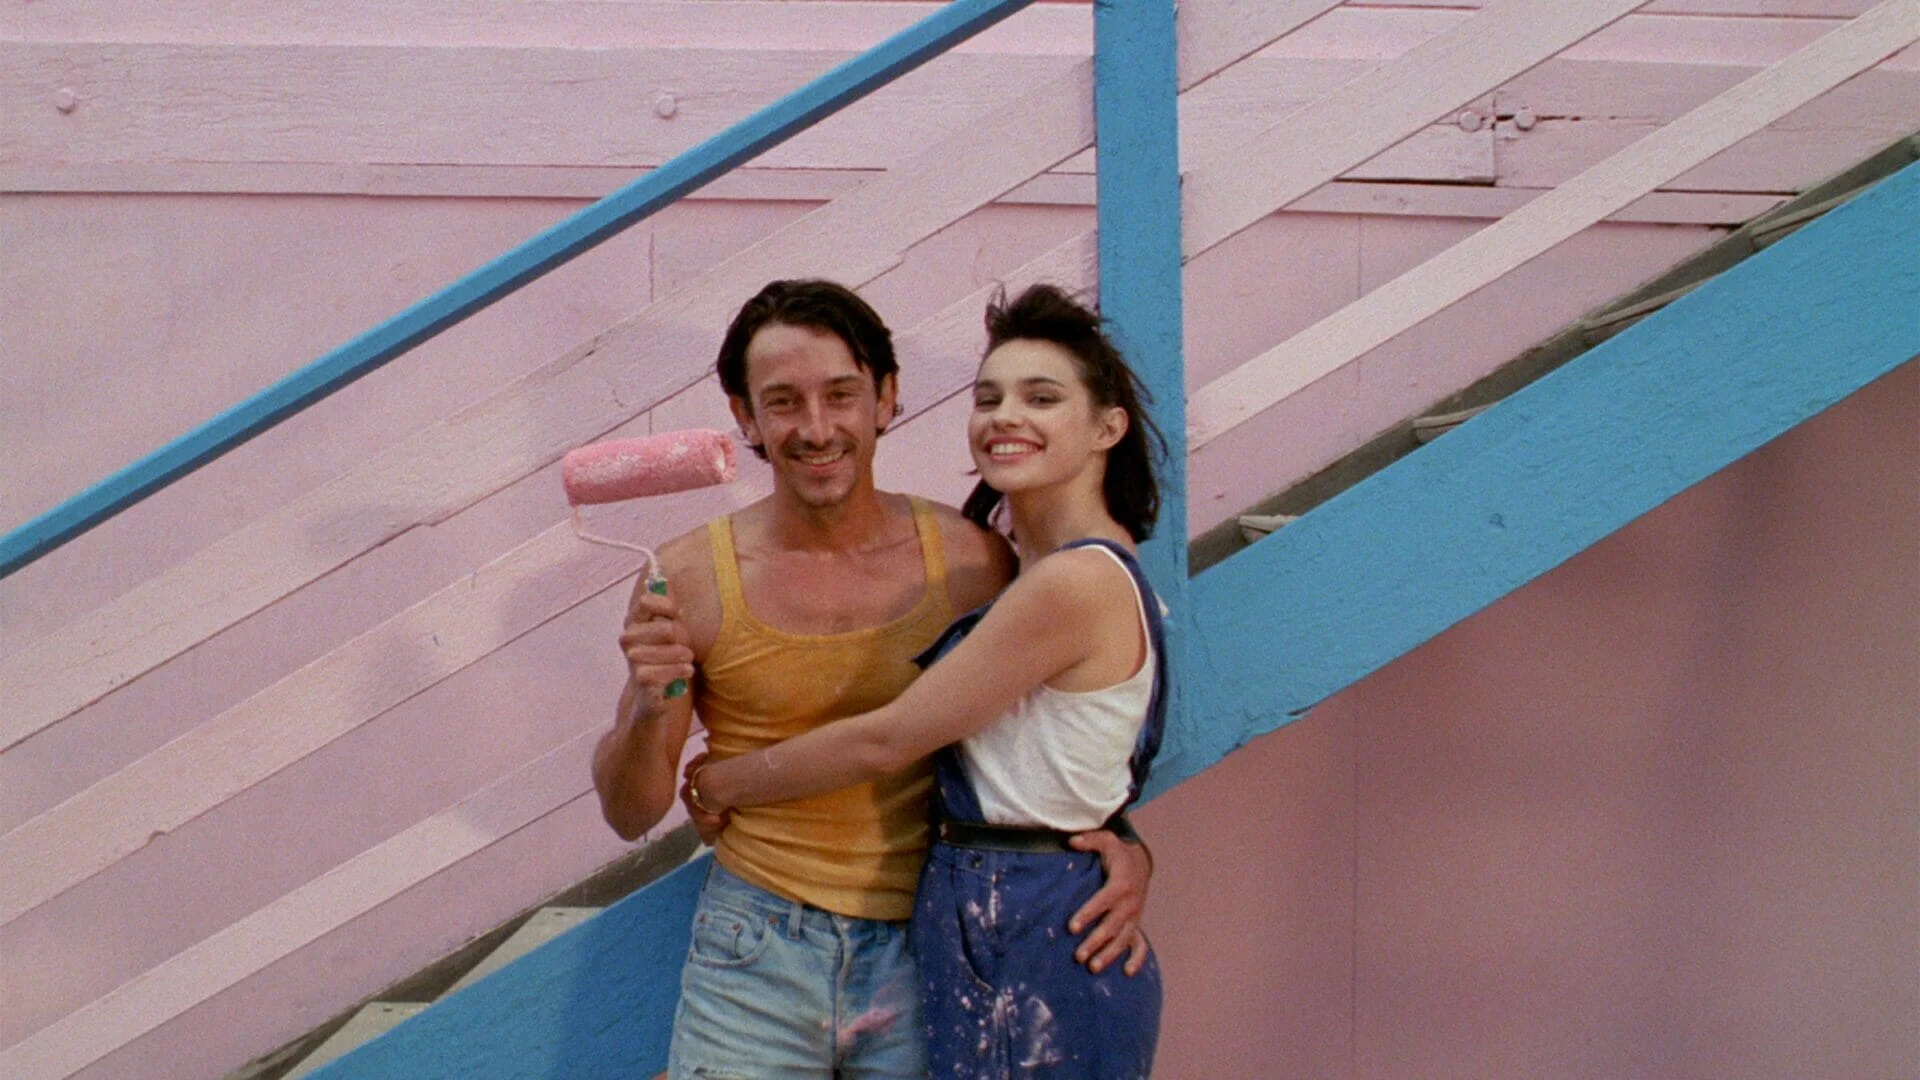 Betty Blue | A commentary on women depiction in the media